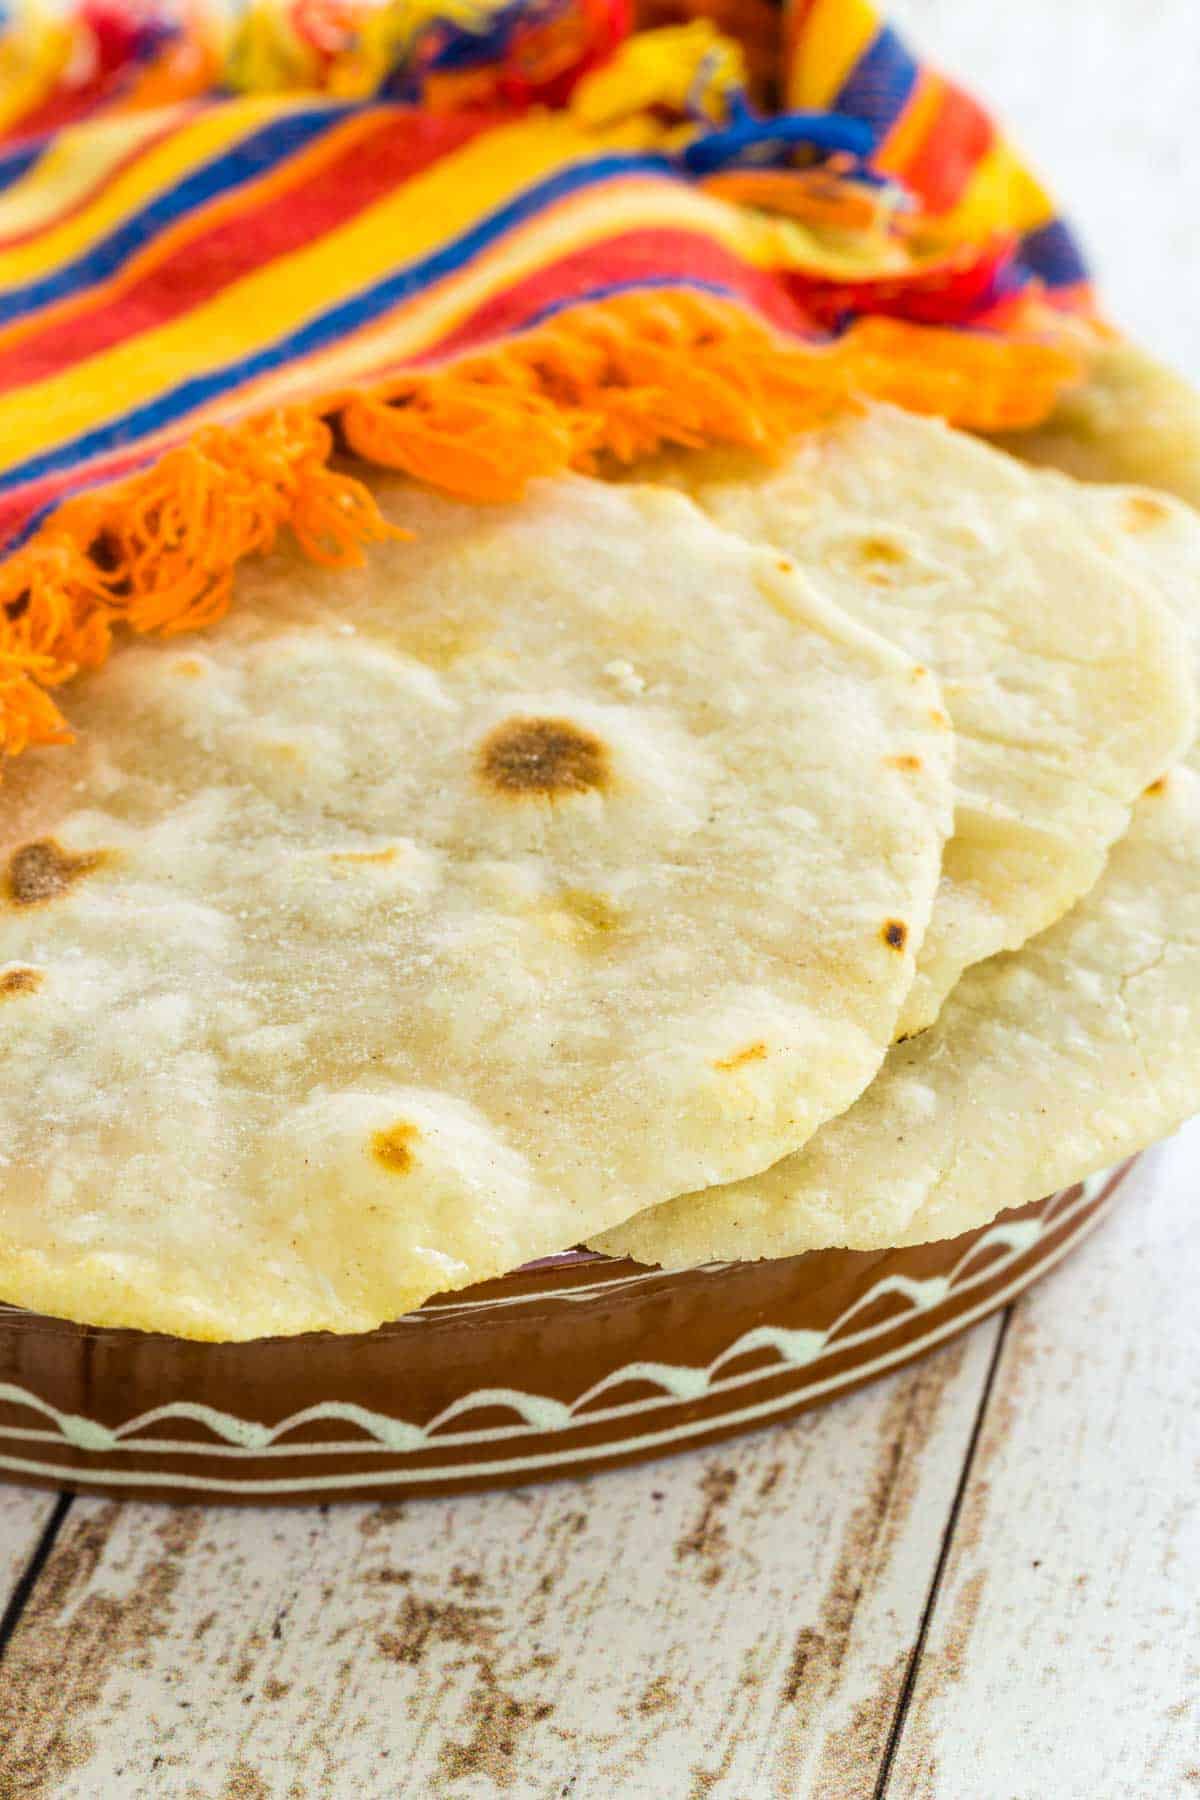 Gluten free tortillas stacked in a bowl beneath a colorful striped cloth to keep warm.